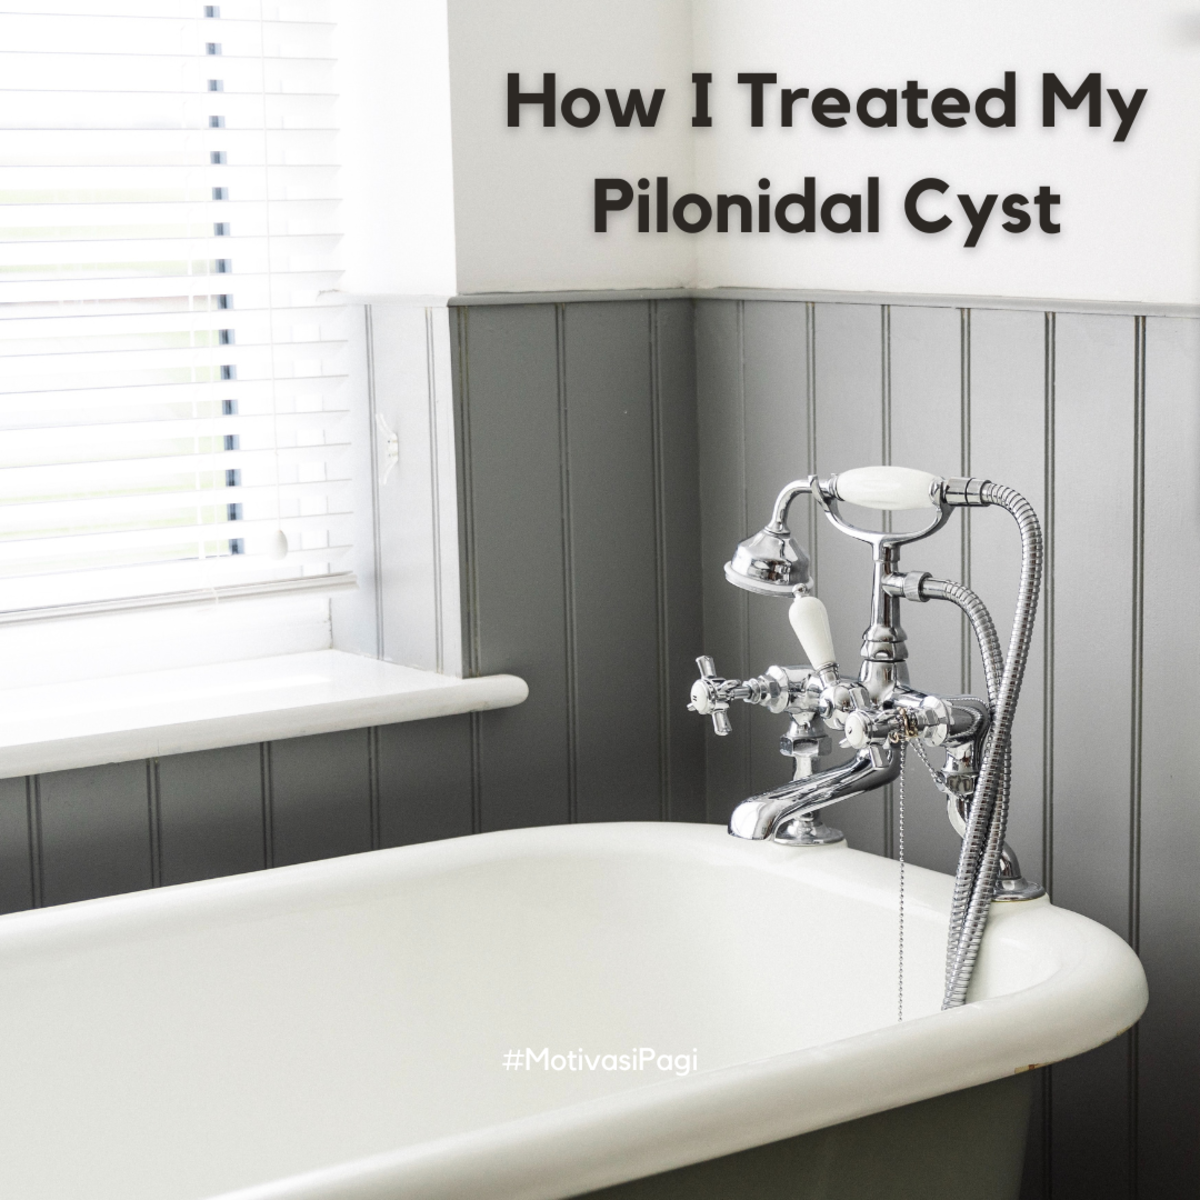 In the last few days of my pilonidal cyst, I took many hot baths to reduce the swelling, which in the end was enough for mine to pop of its own accord.